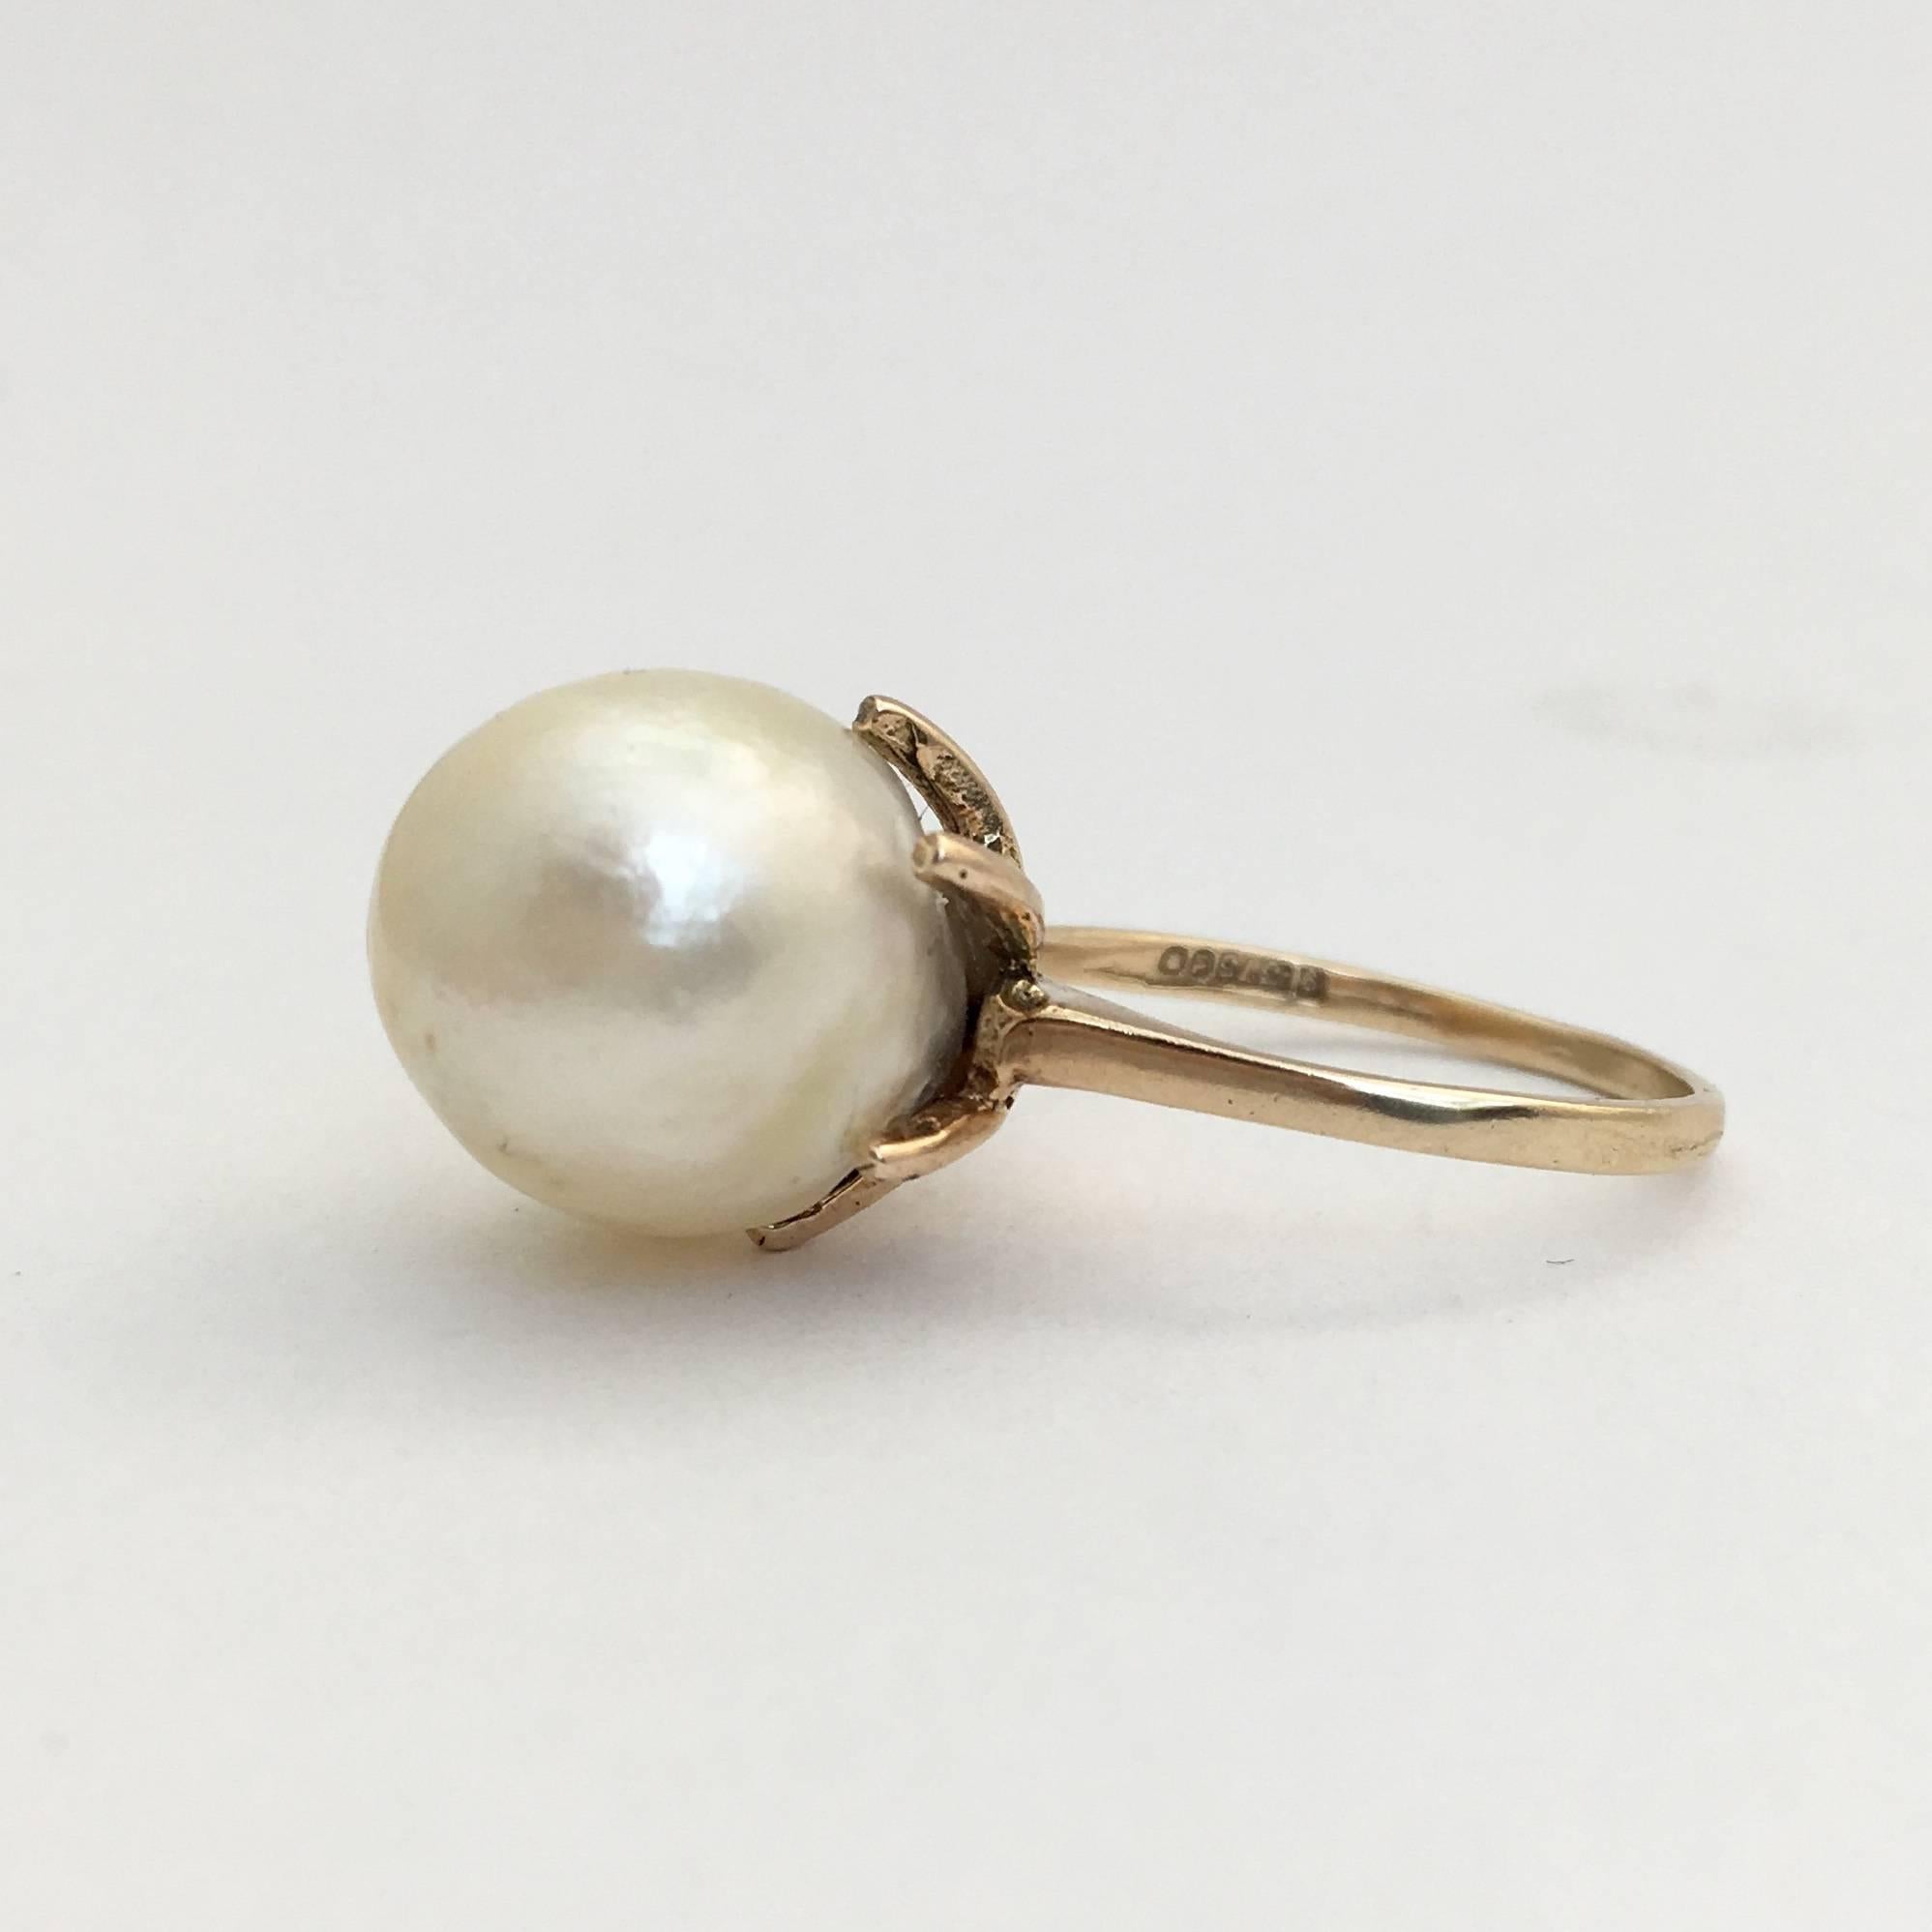 Retro 1950s Cocktail Ring Large Baroque Pearl English Midcentury Gold Vintage Jewelry For Sale